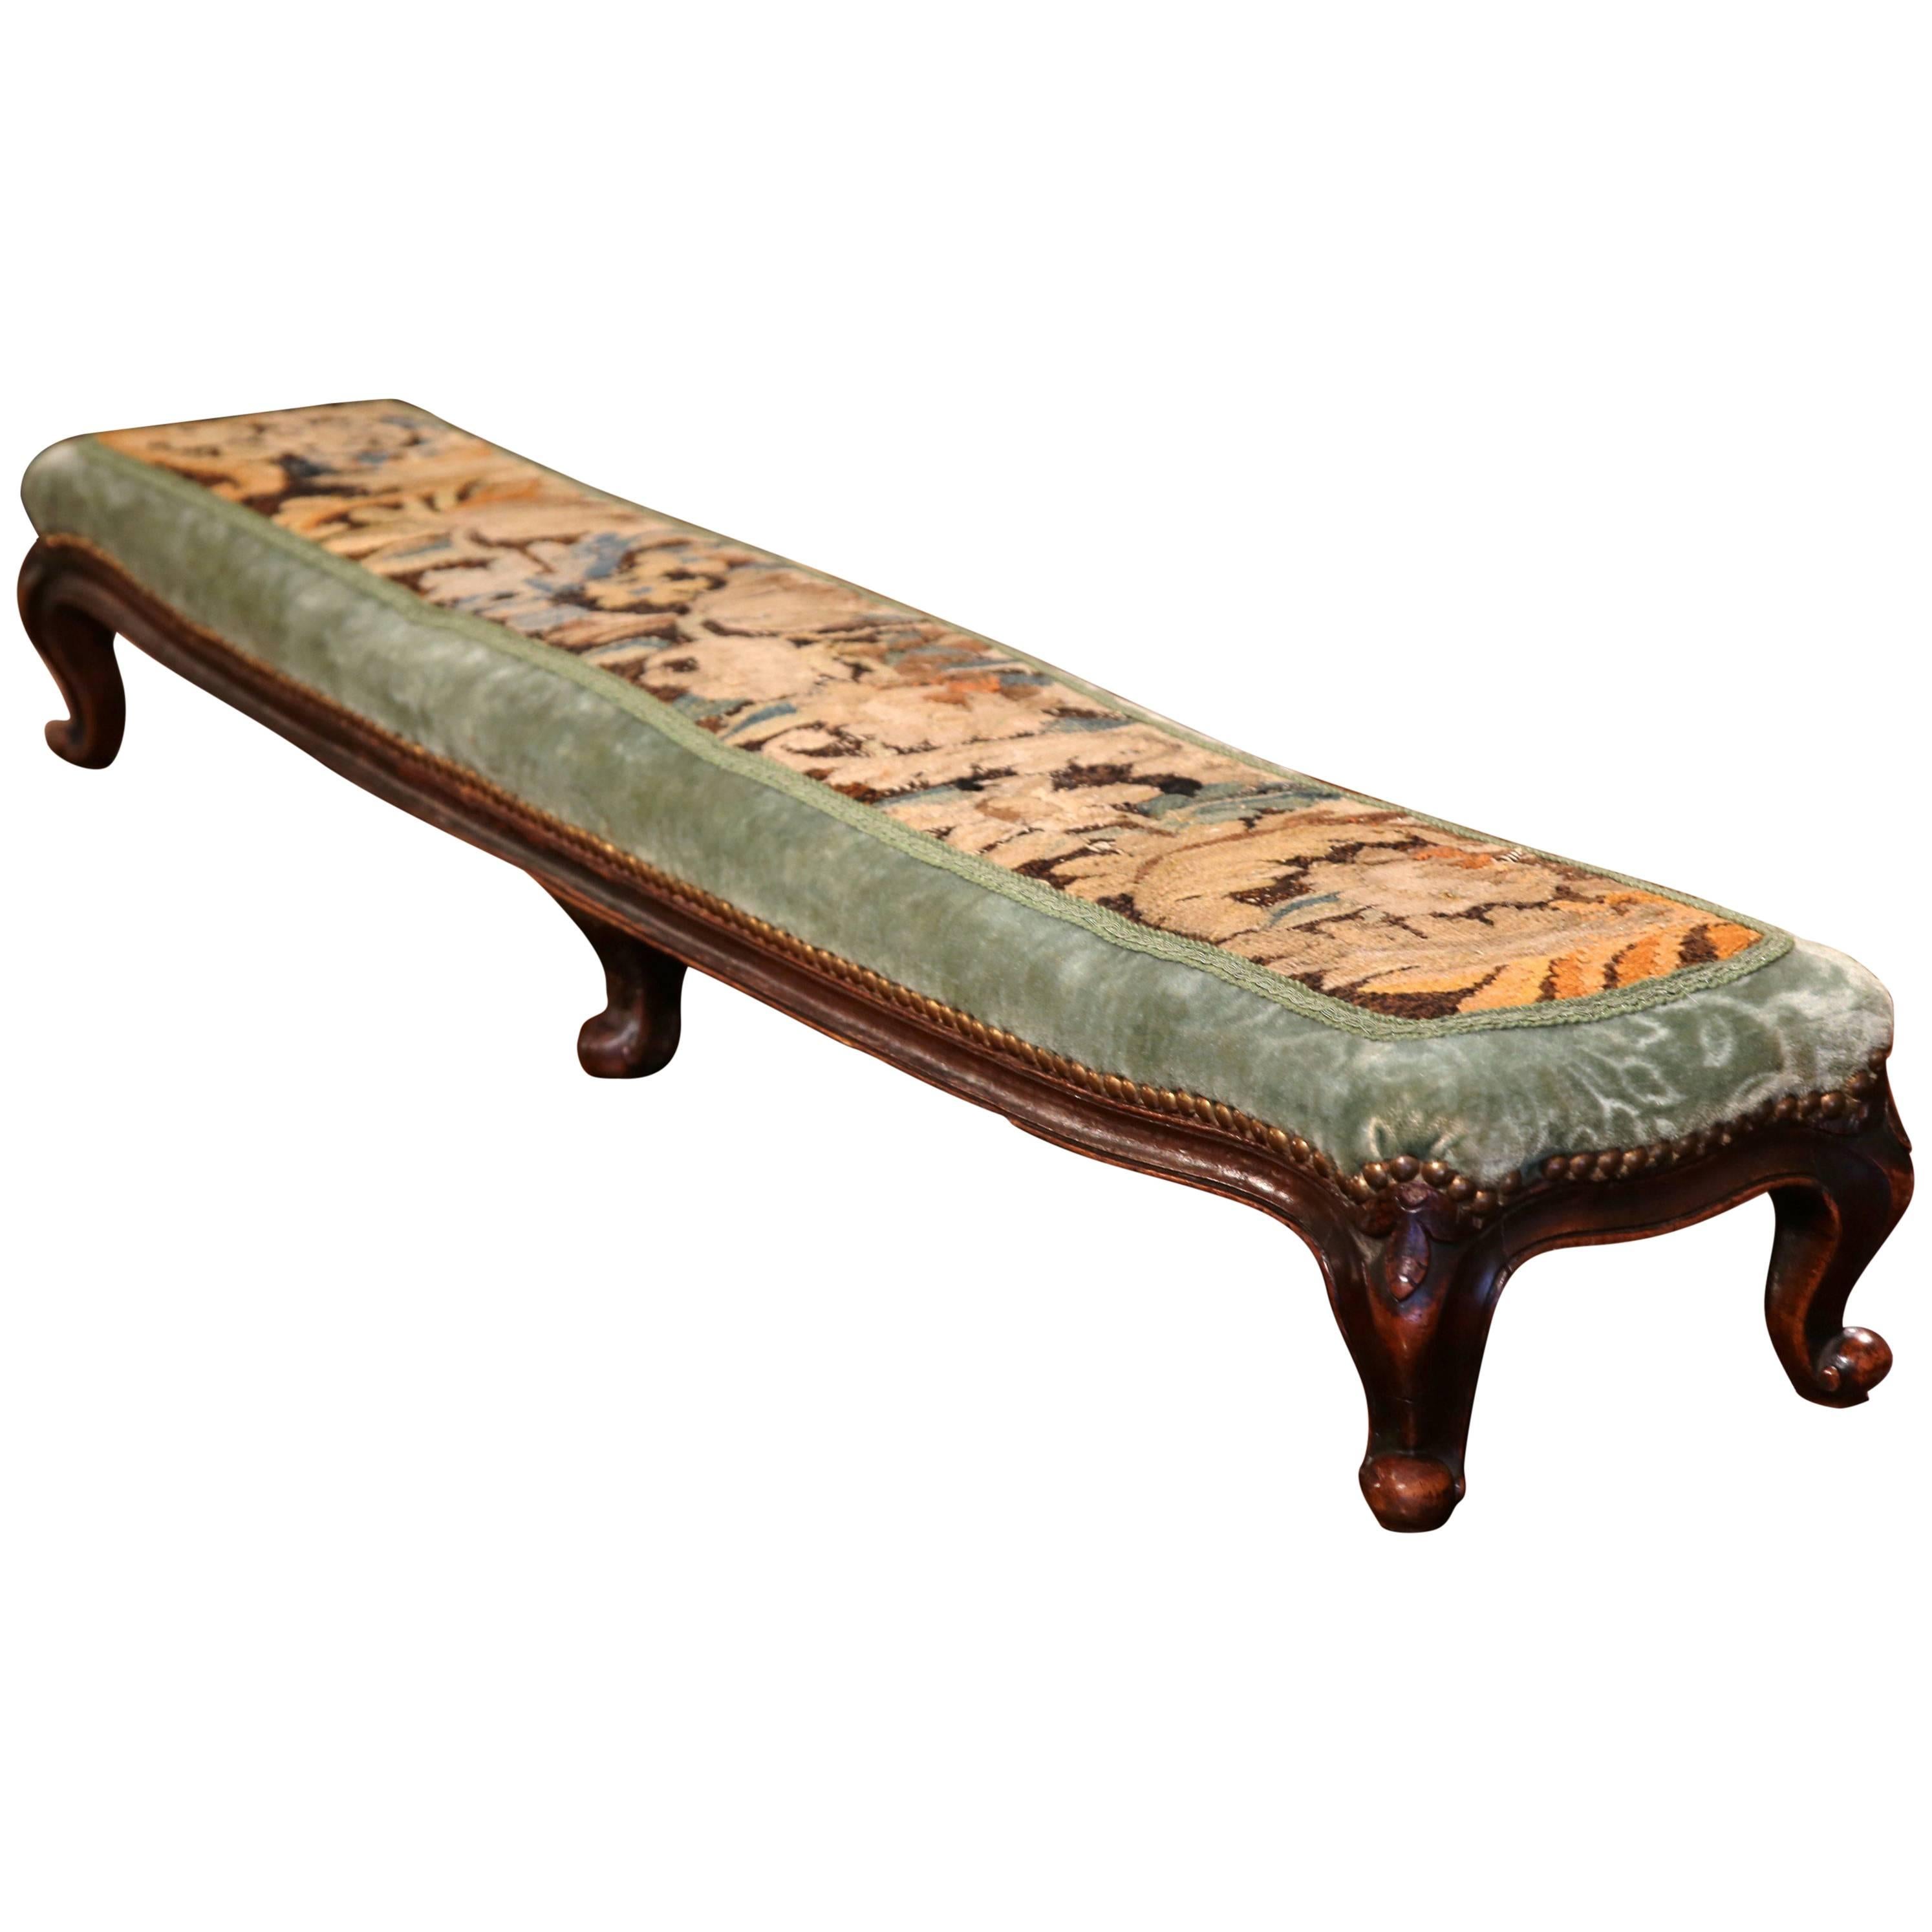 19th Century French Louis XV Walnut Six-Leg Foot Bench with Aubusson Tapestry